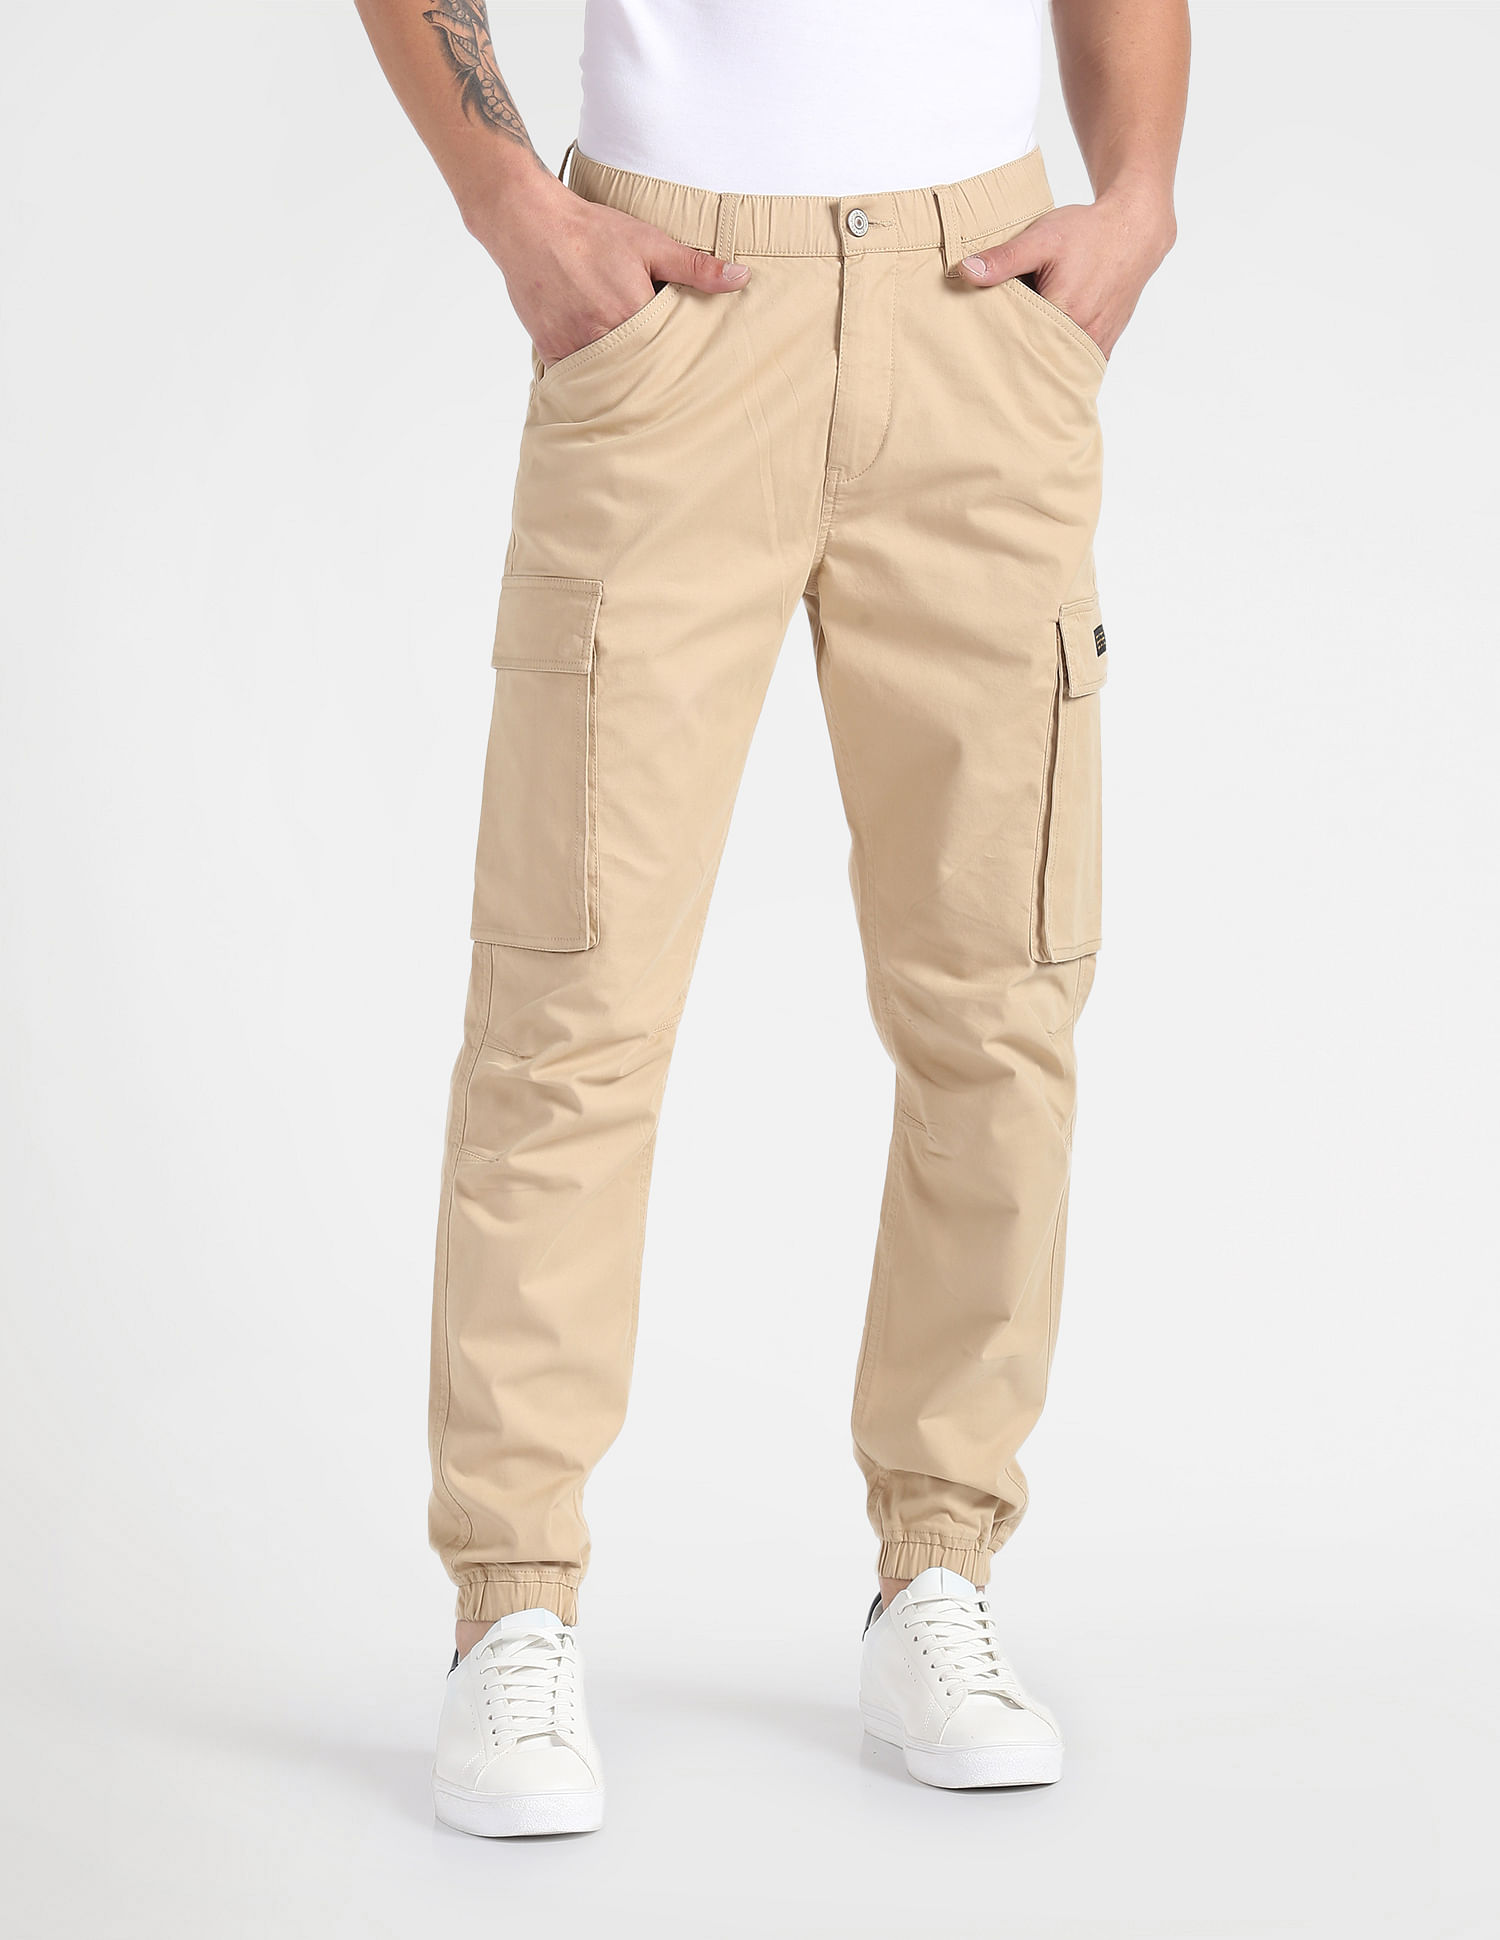 Buy flying machine cargo trousers in India @ Limeroad